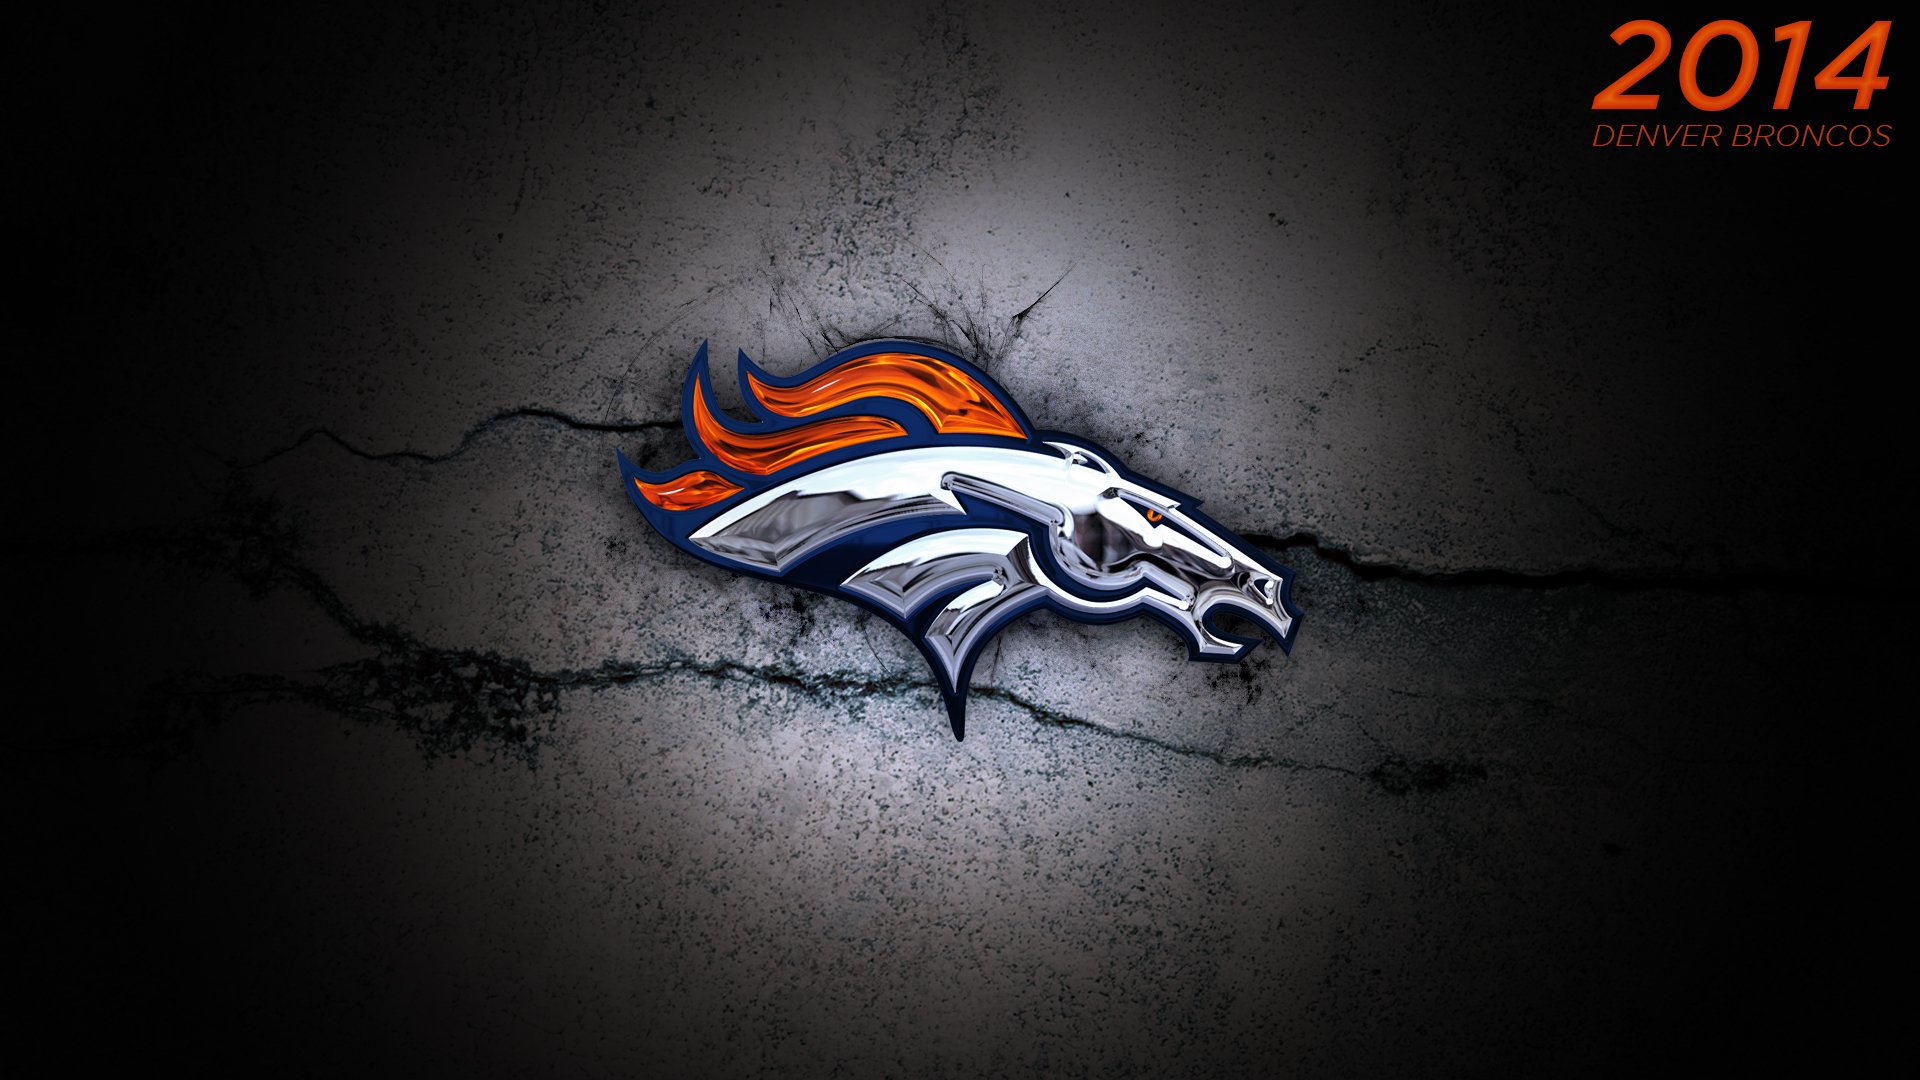 DENVER BRONCOS FREE Wallpapers Background images   hippowallpapers 1920x1080